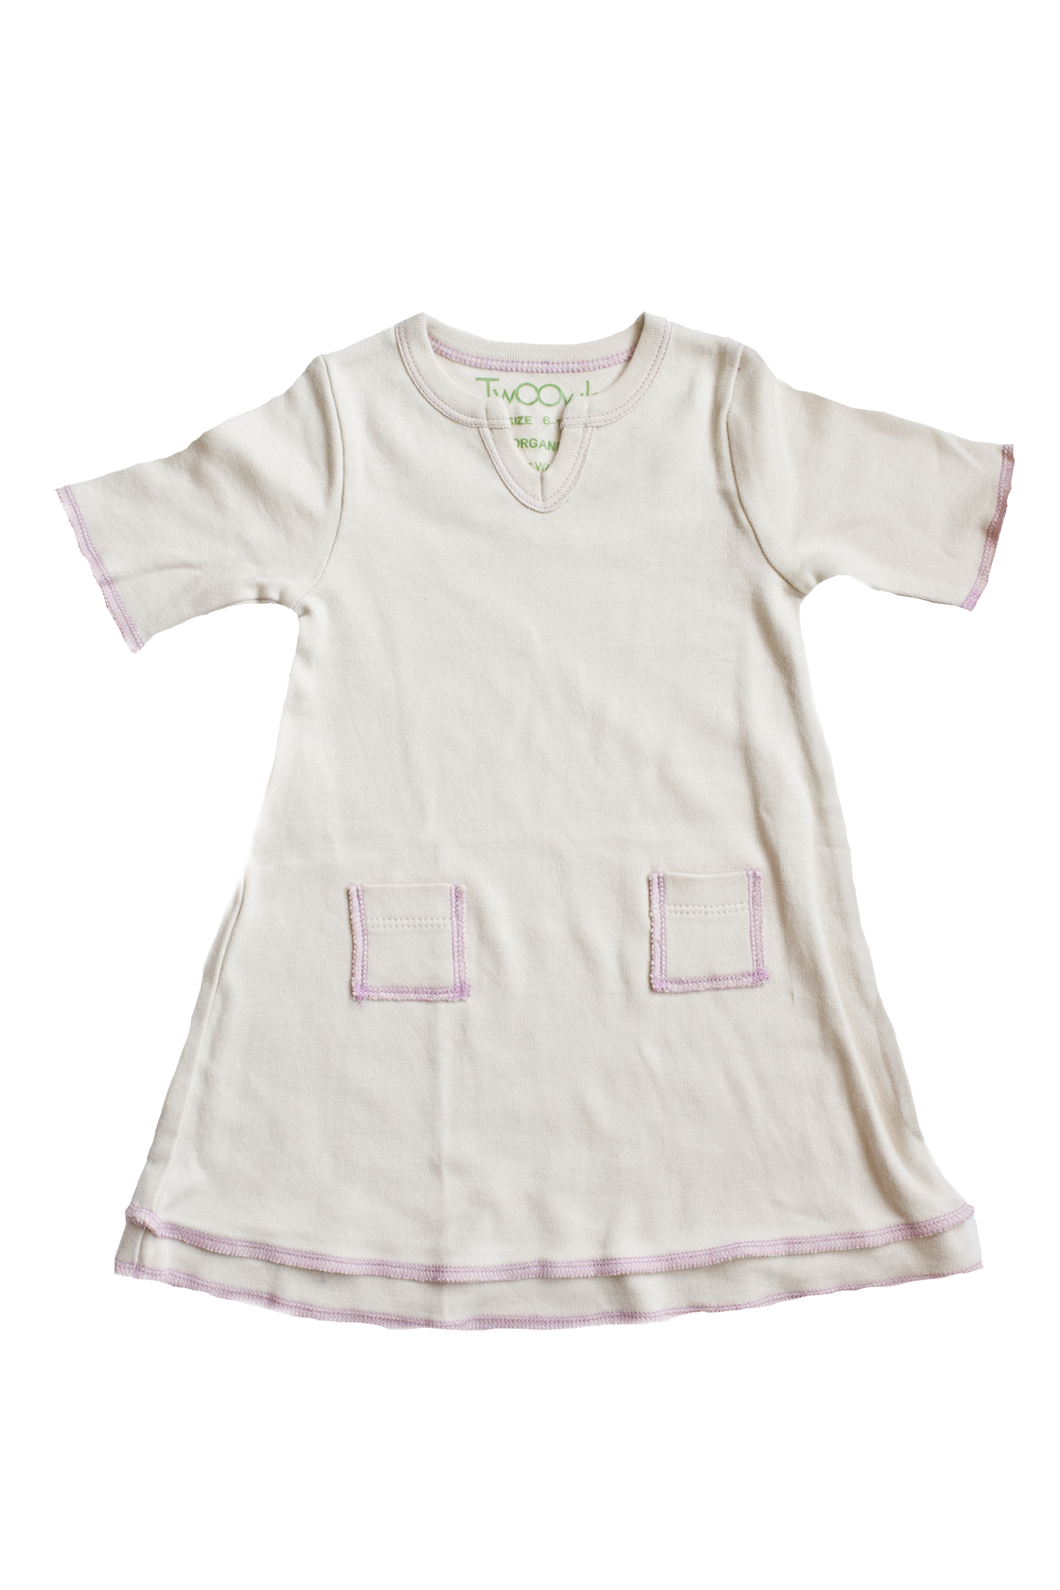 TwOOwls Natural/Pink Baby Tunic Dress -100% organic cotton